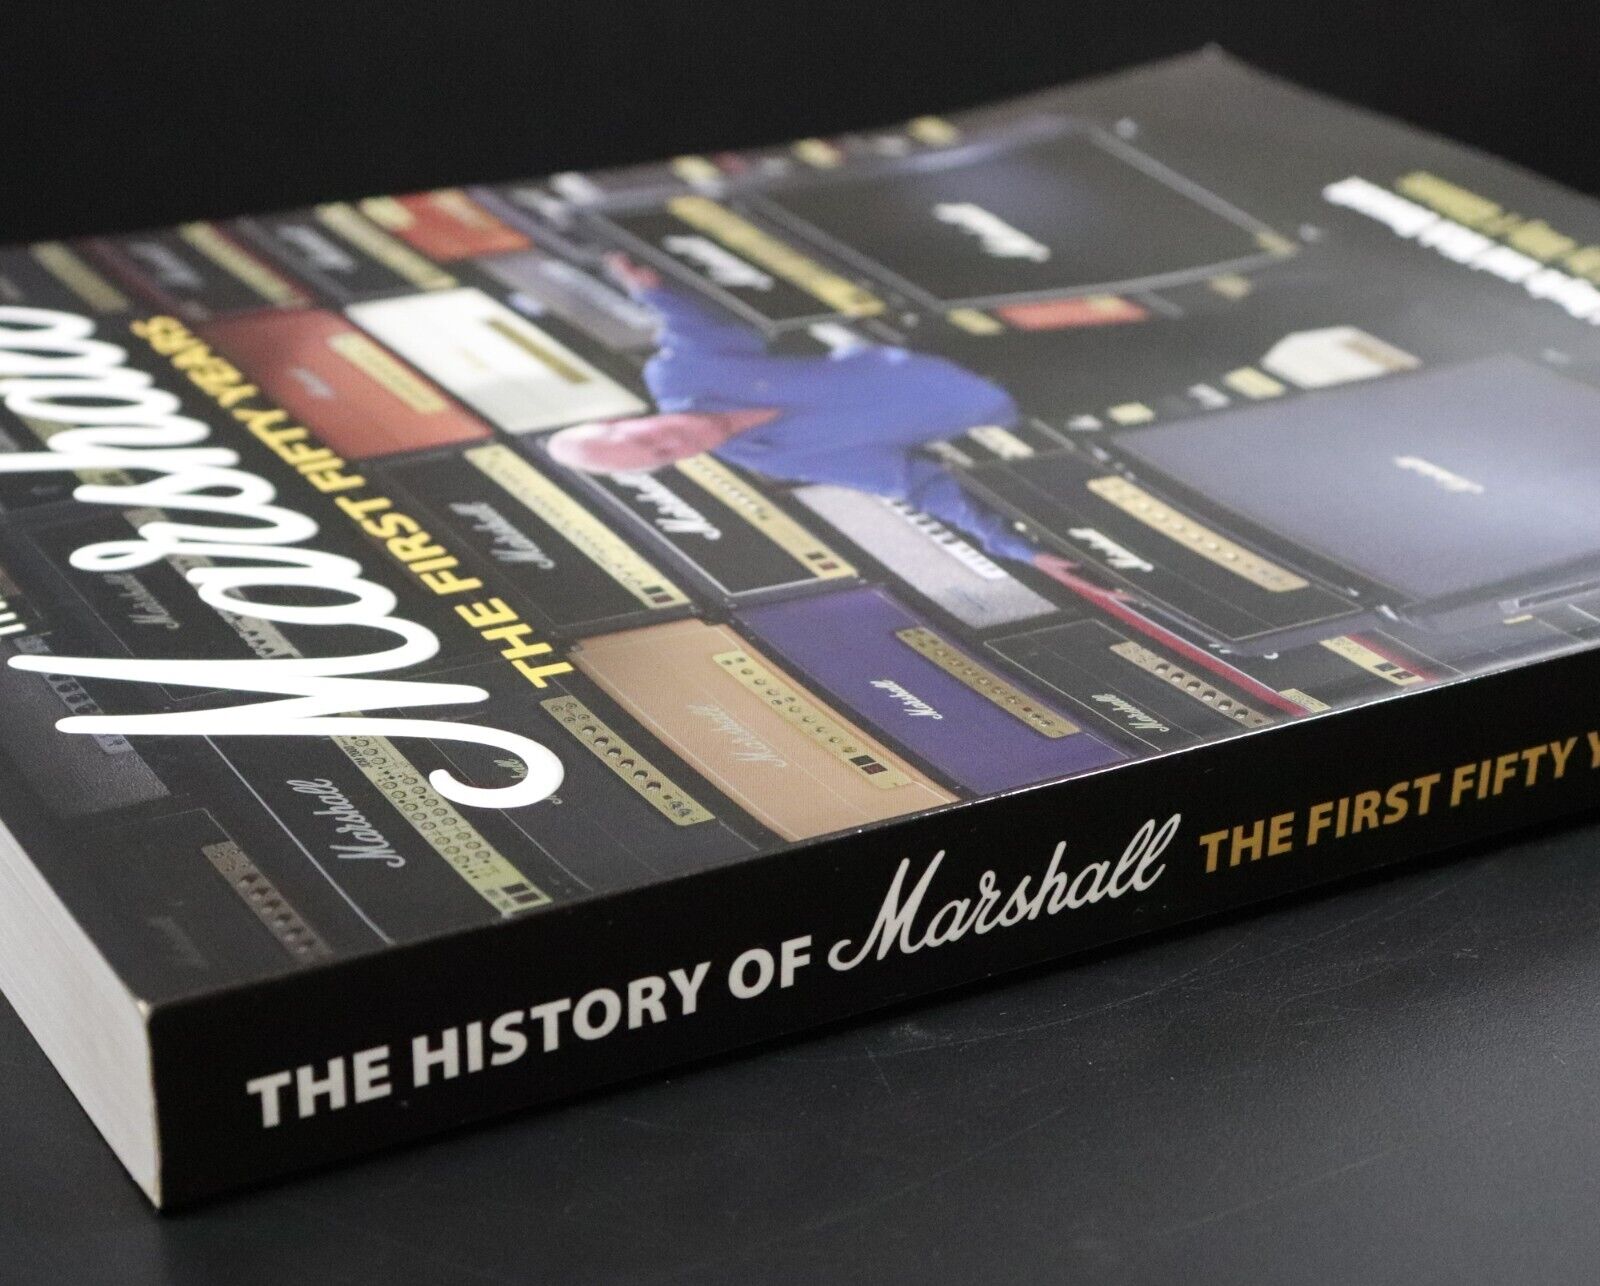 2013 The History Of Marshall - First Fifty Years Marshall Amplifiers Guitar Book - 0